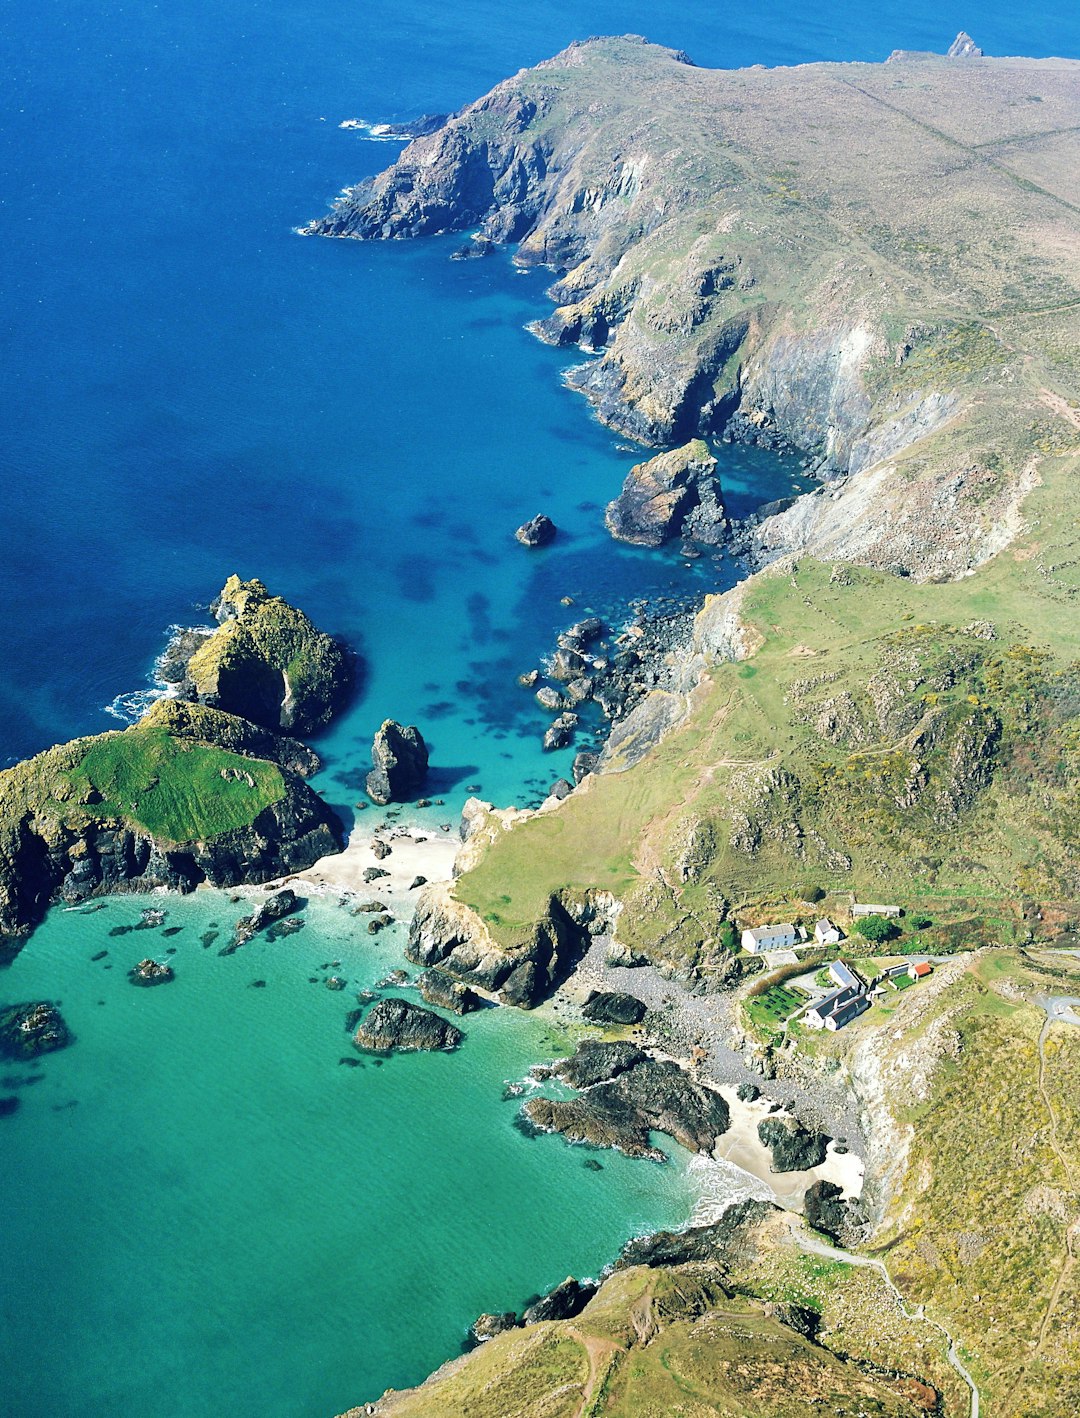 Travel Tips and Stories of Kynance Cove in United Kingdom